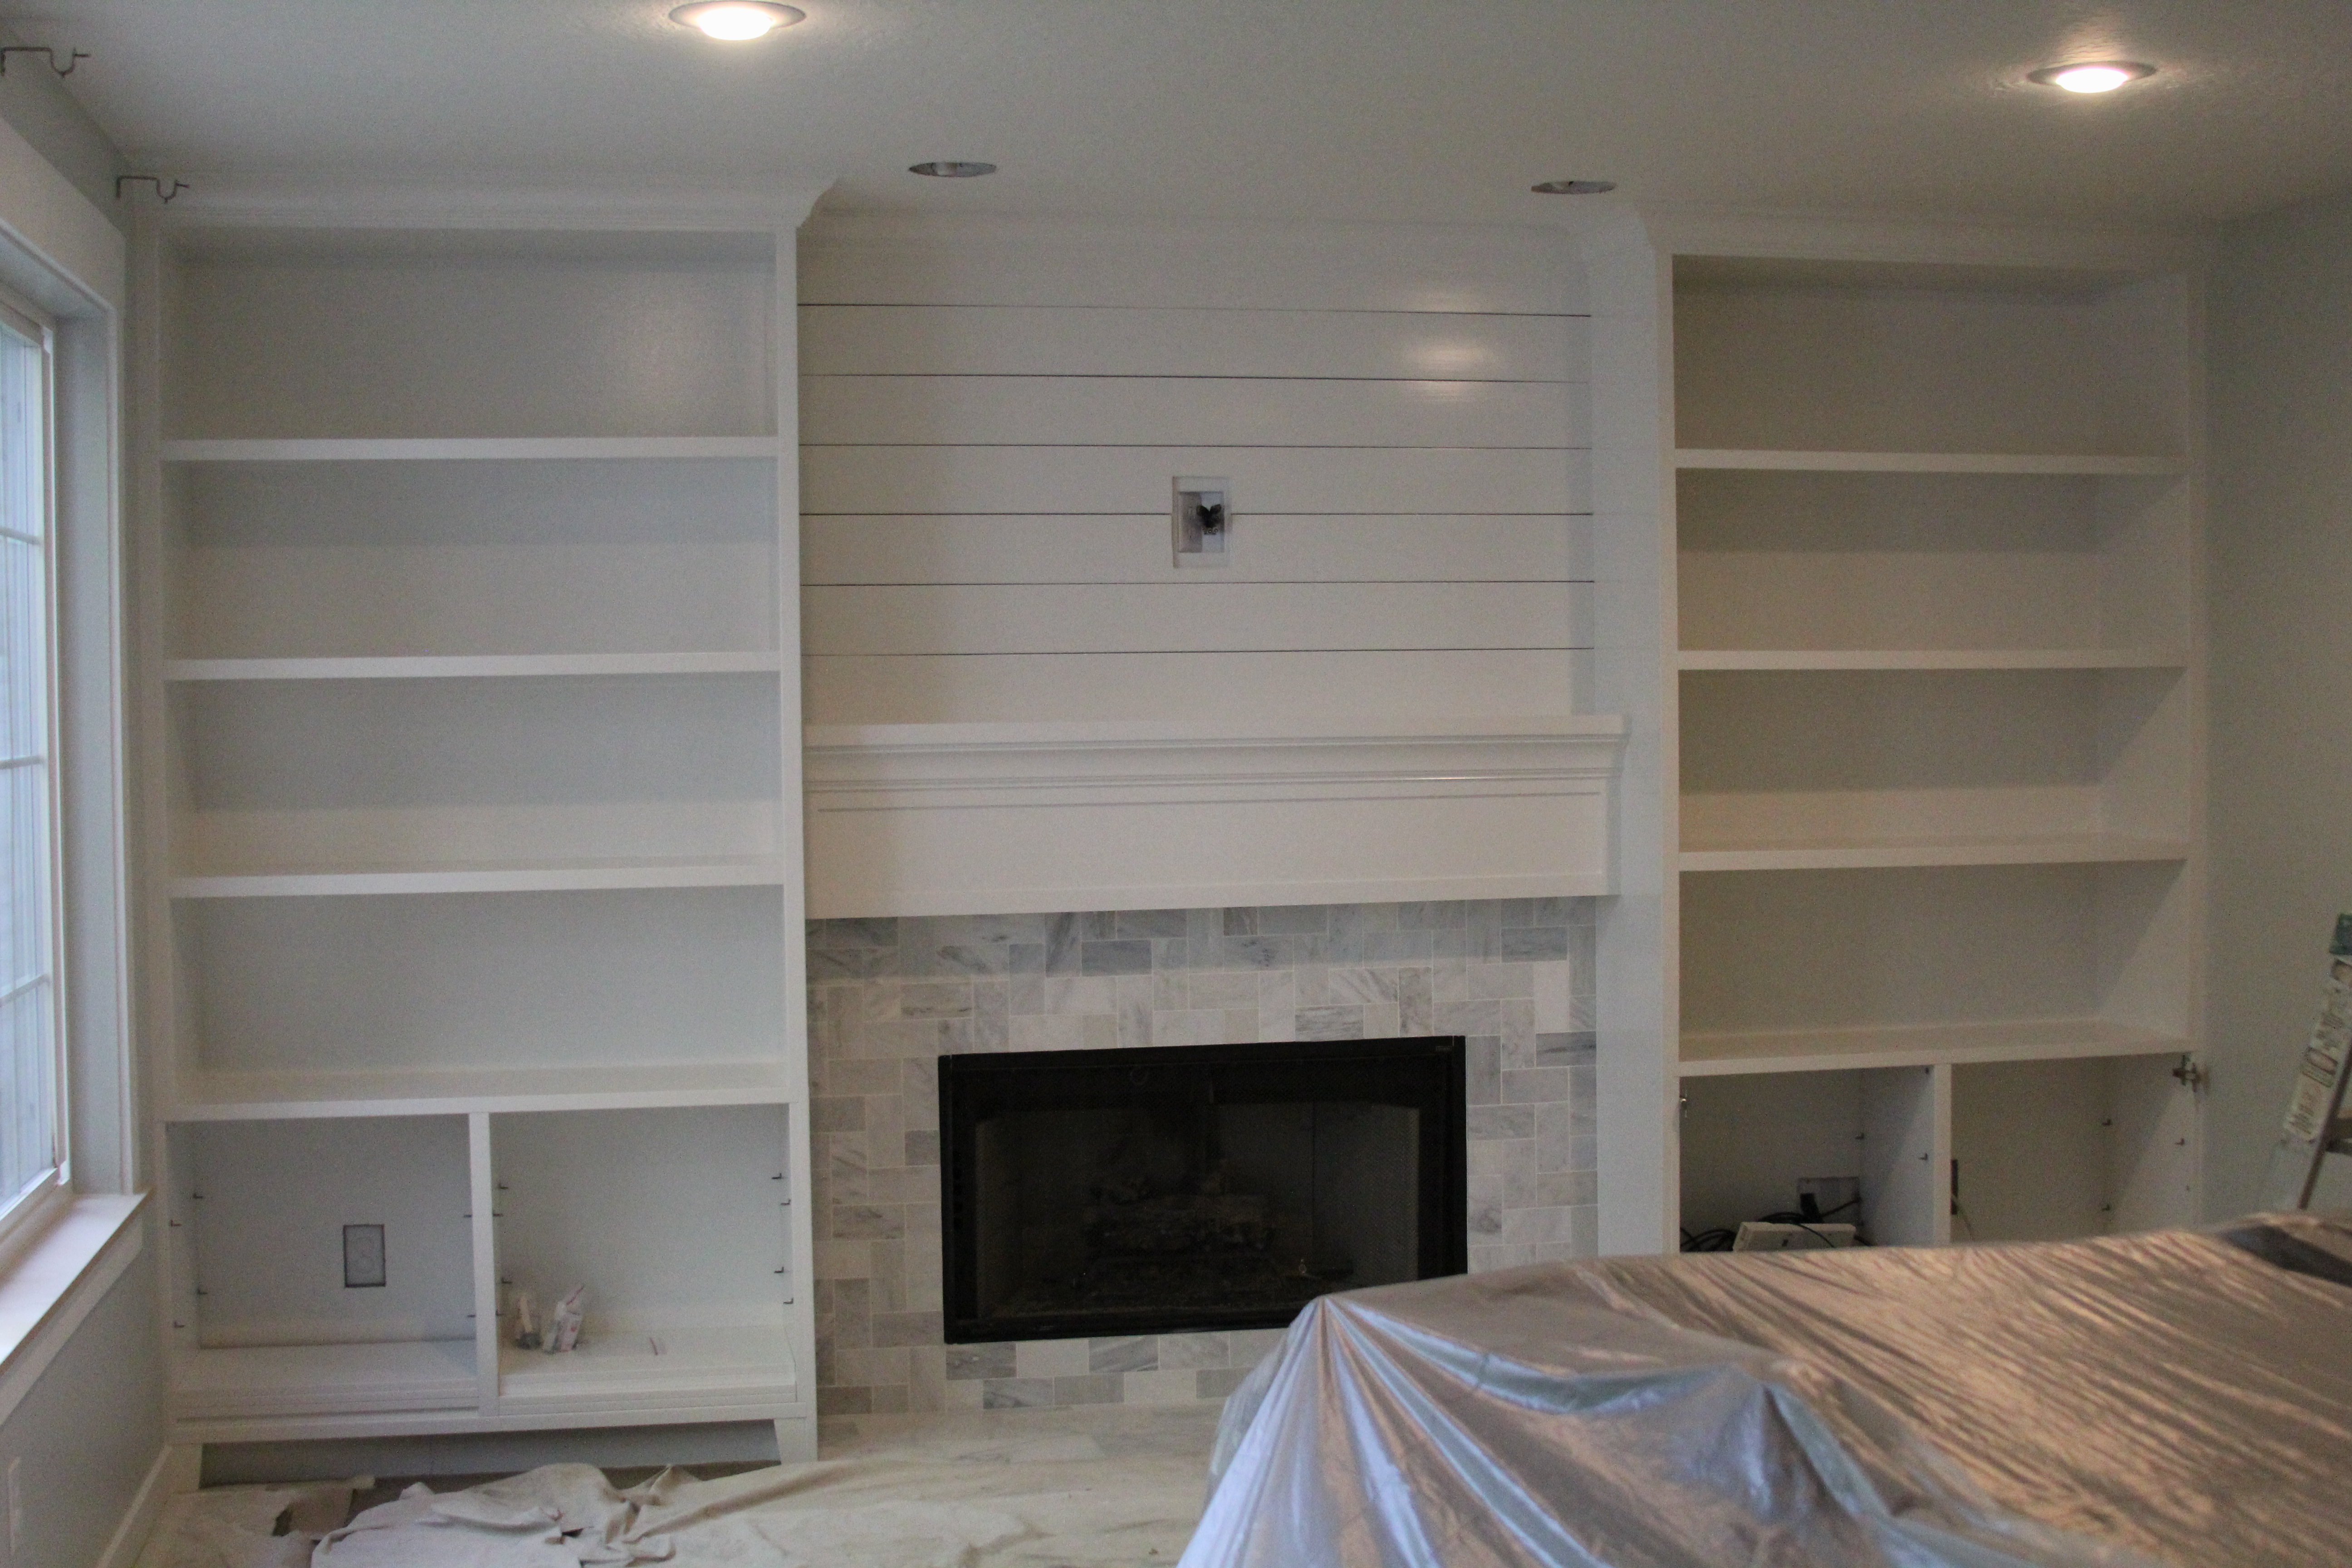 Diy Built Ins Part 2 Stagg Design, How To Make Built In Shelves Around Fireplace